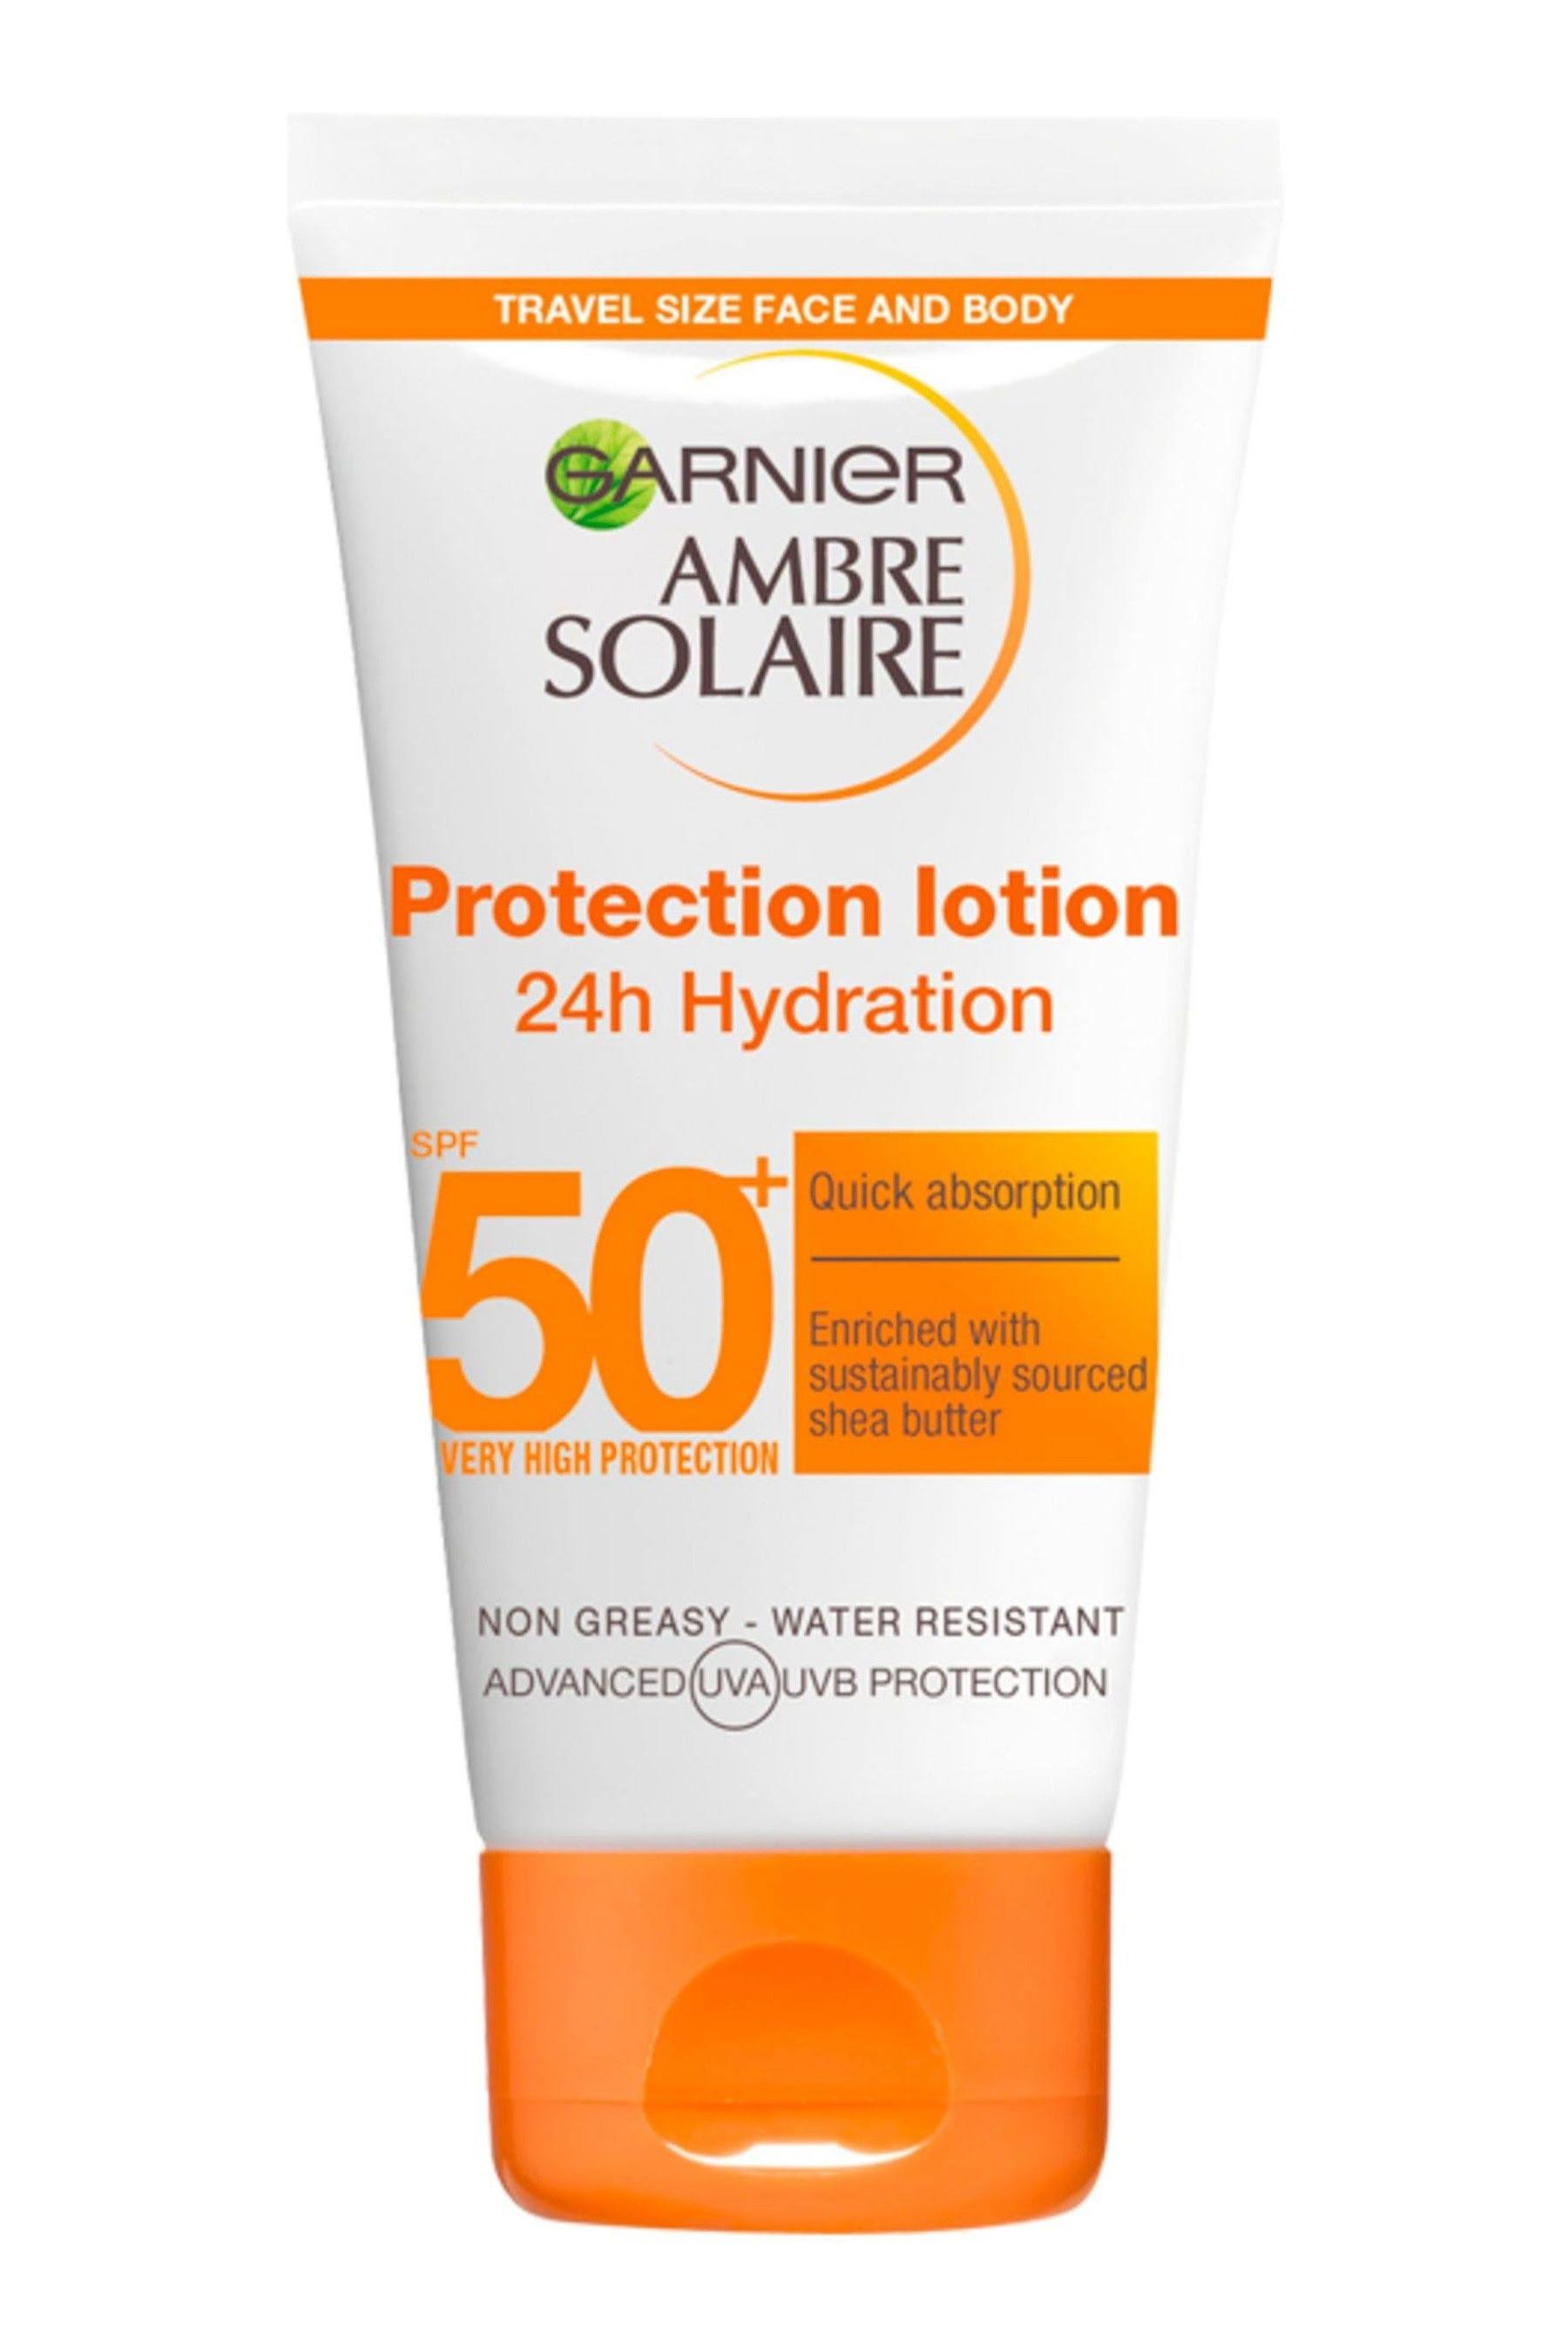 Garnier Ambre Solaire 24 Hydration Protection Lotion - SPF50, 50ml